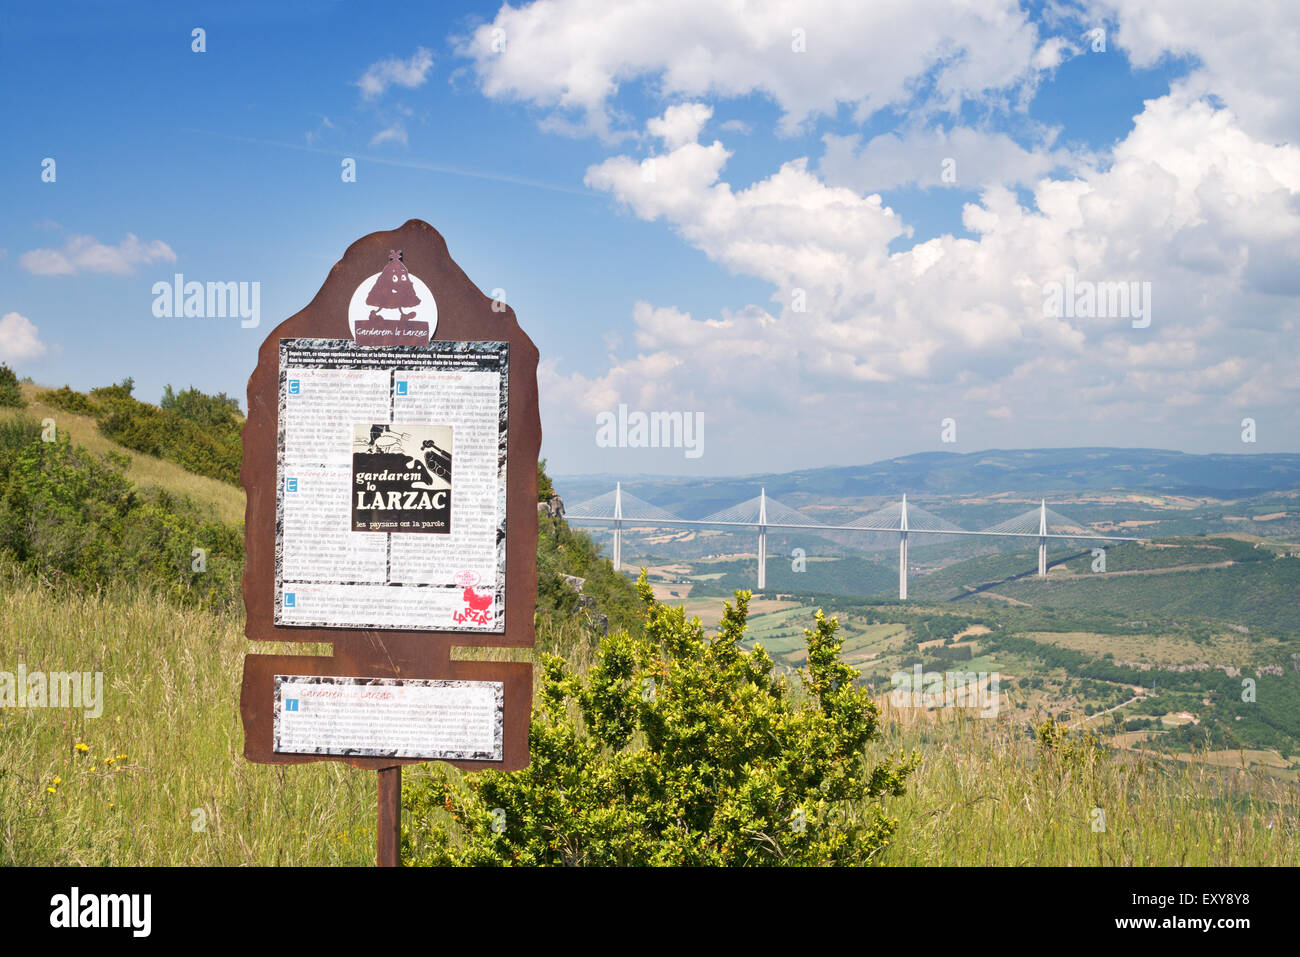 Gardarem Lo Larzac sign above Millau with the viaduct in he background, Averyon,  Midi-Pyrenees, France, Europe Stock Photo